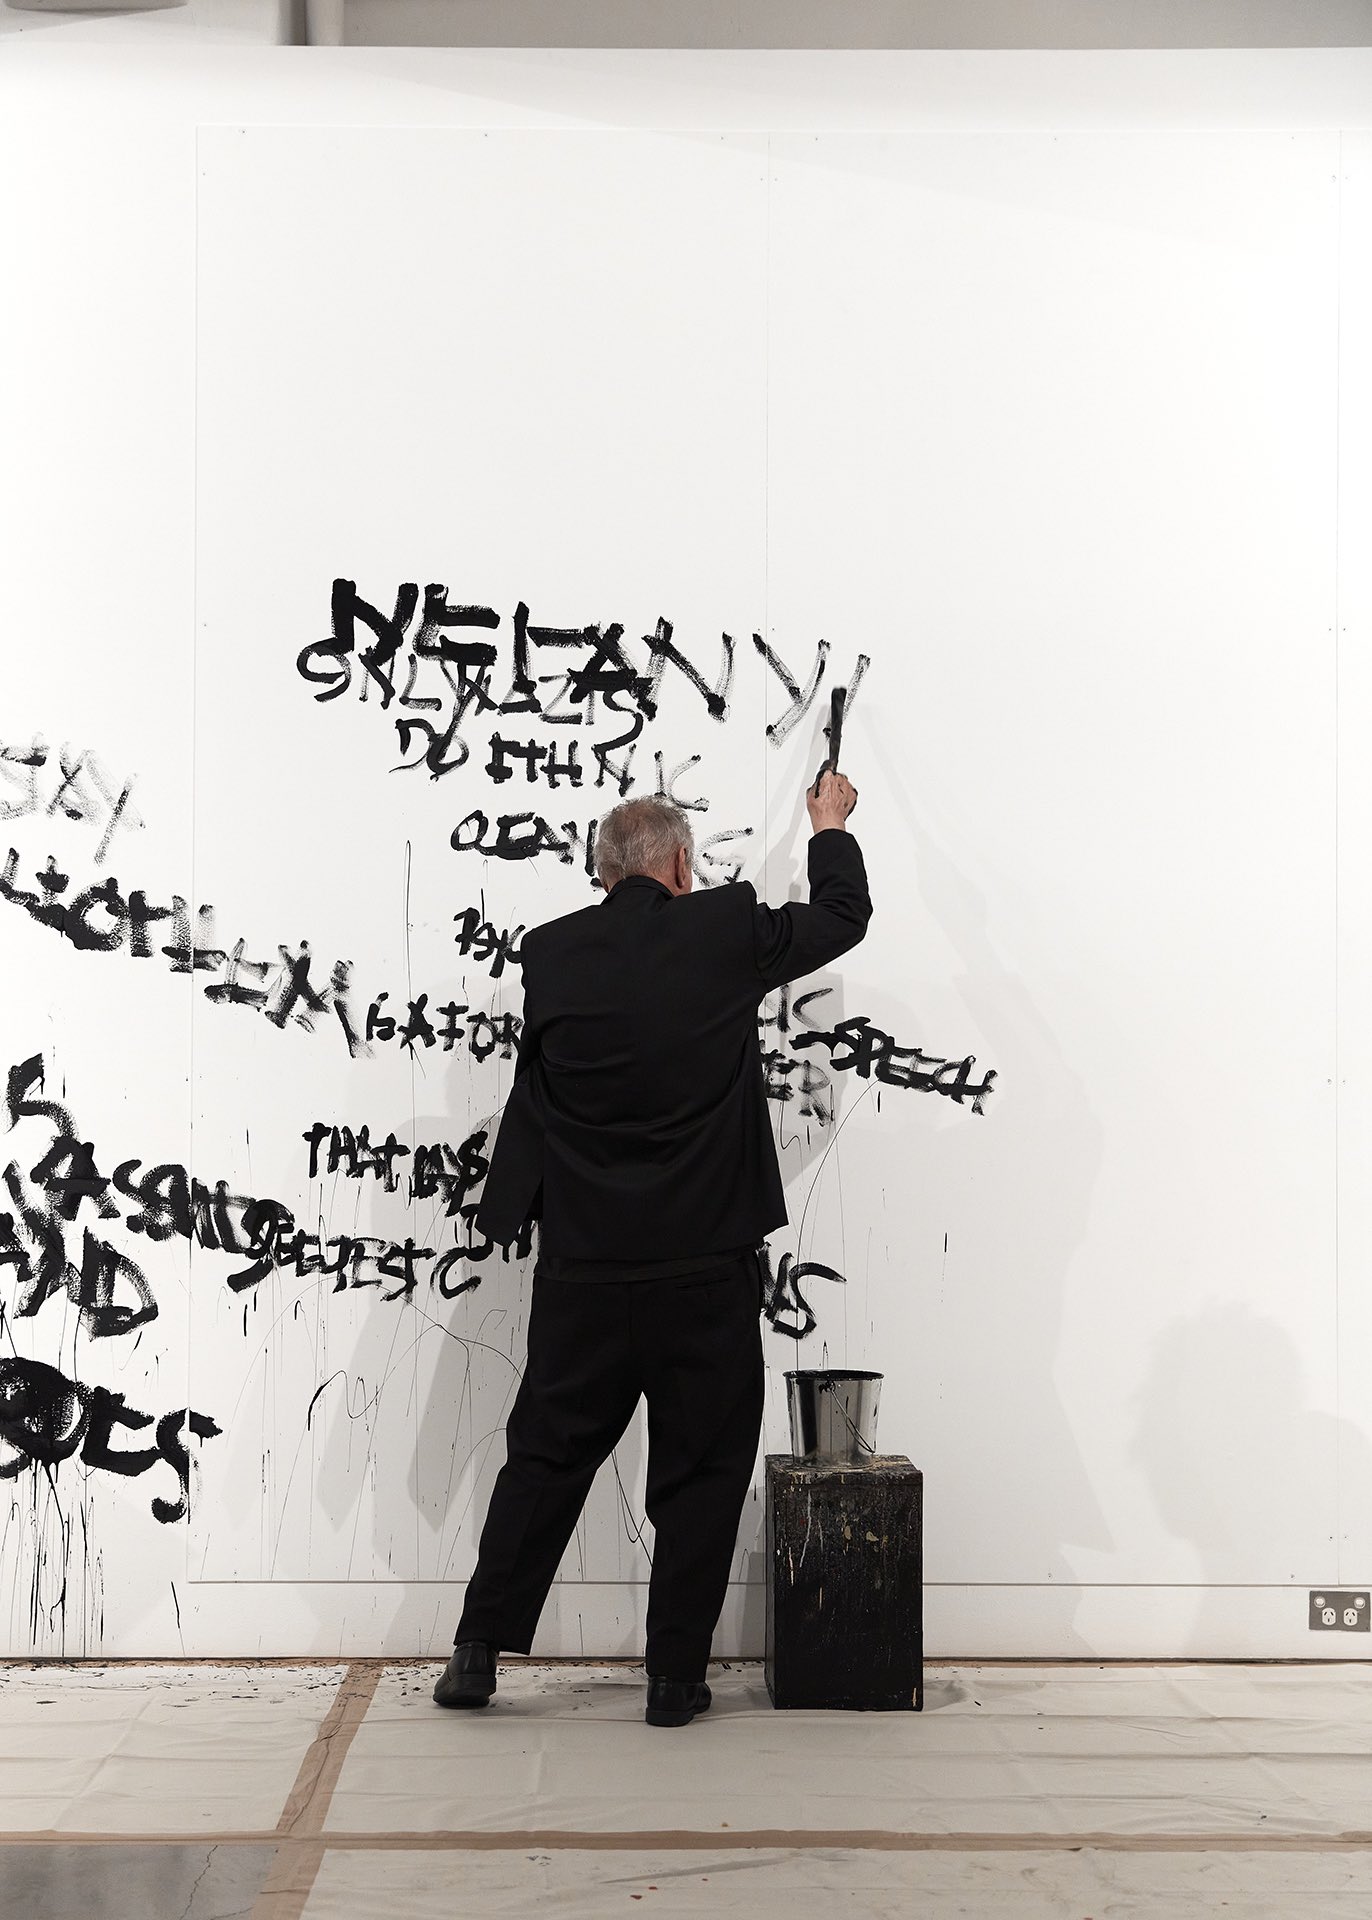 Artist Mike Parr painting text onto a white gallery wall with black paint, while his eyes are closed.